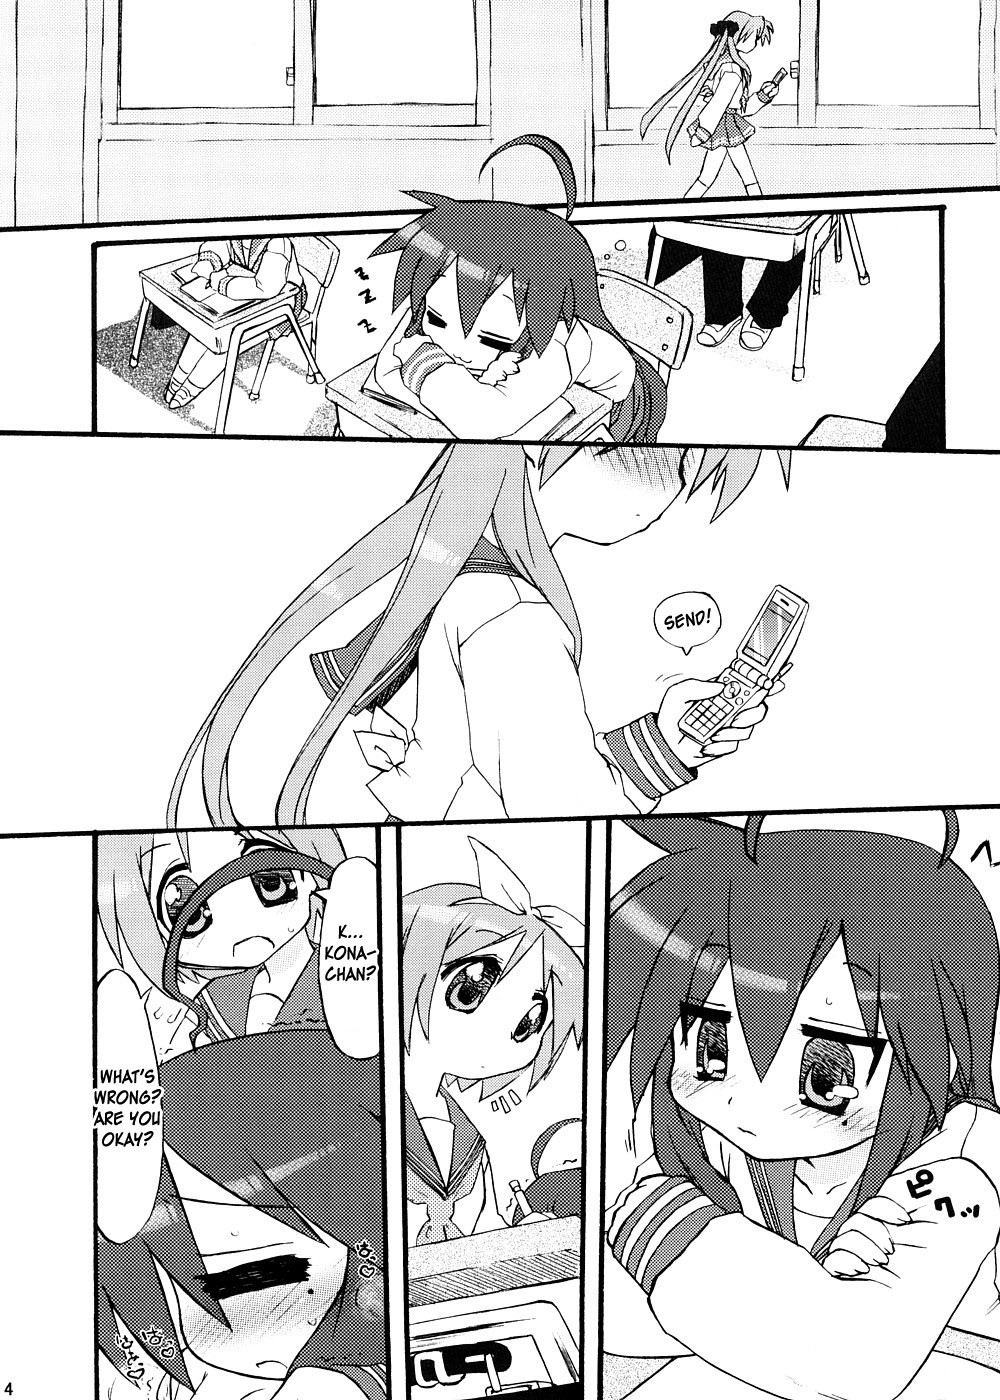 lily x Lily hentai manga picture 2